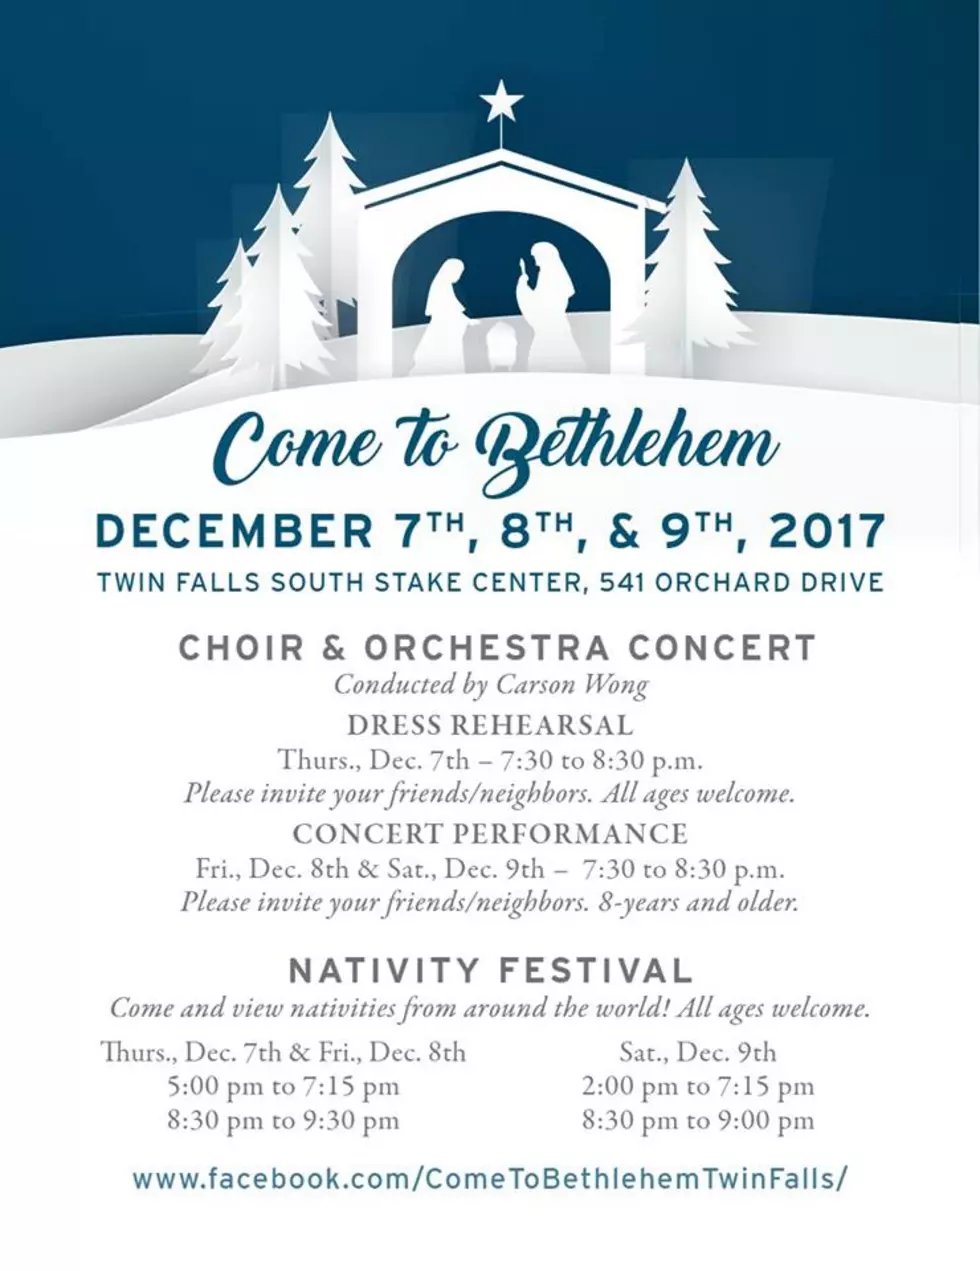 Come To Bethlehem Concert And Nativity Festival 2017 In Twin Falls